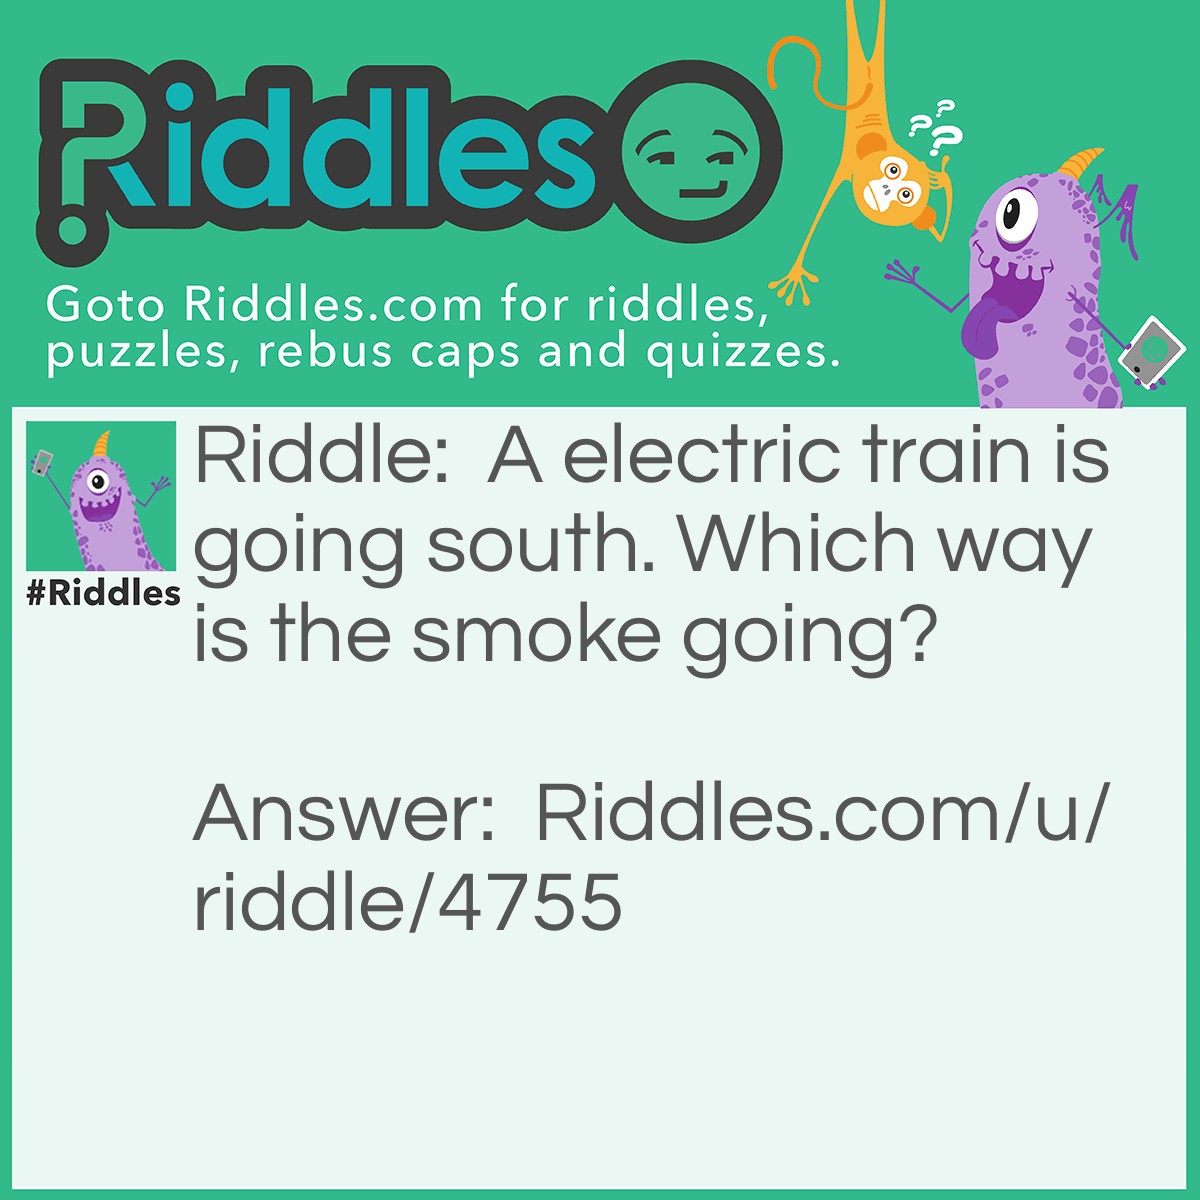 Riddle: A electric train is going south. Which way is the smoke going? Answer: It's a electric train.